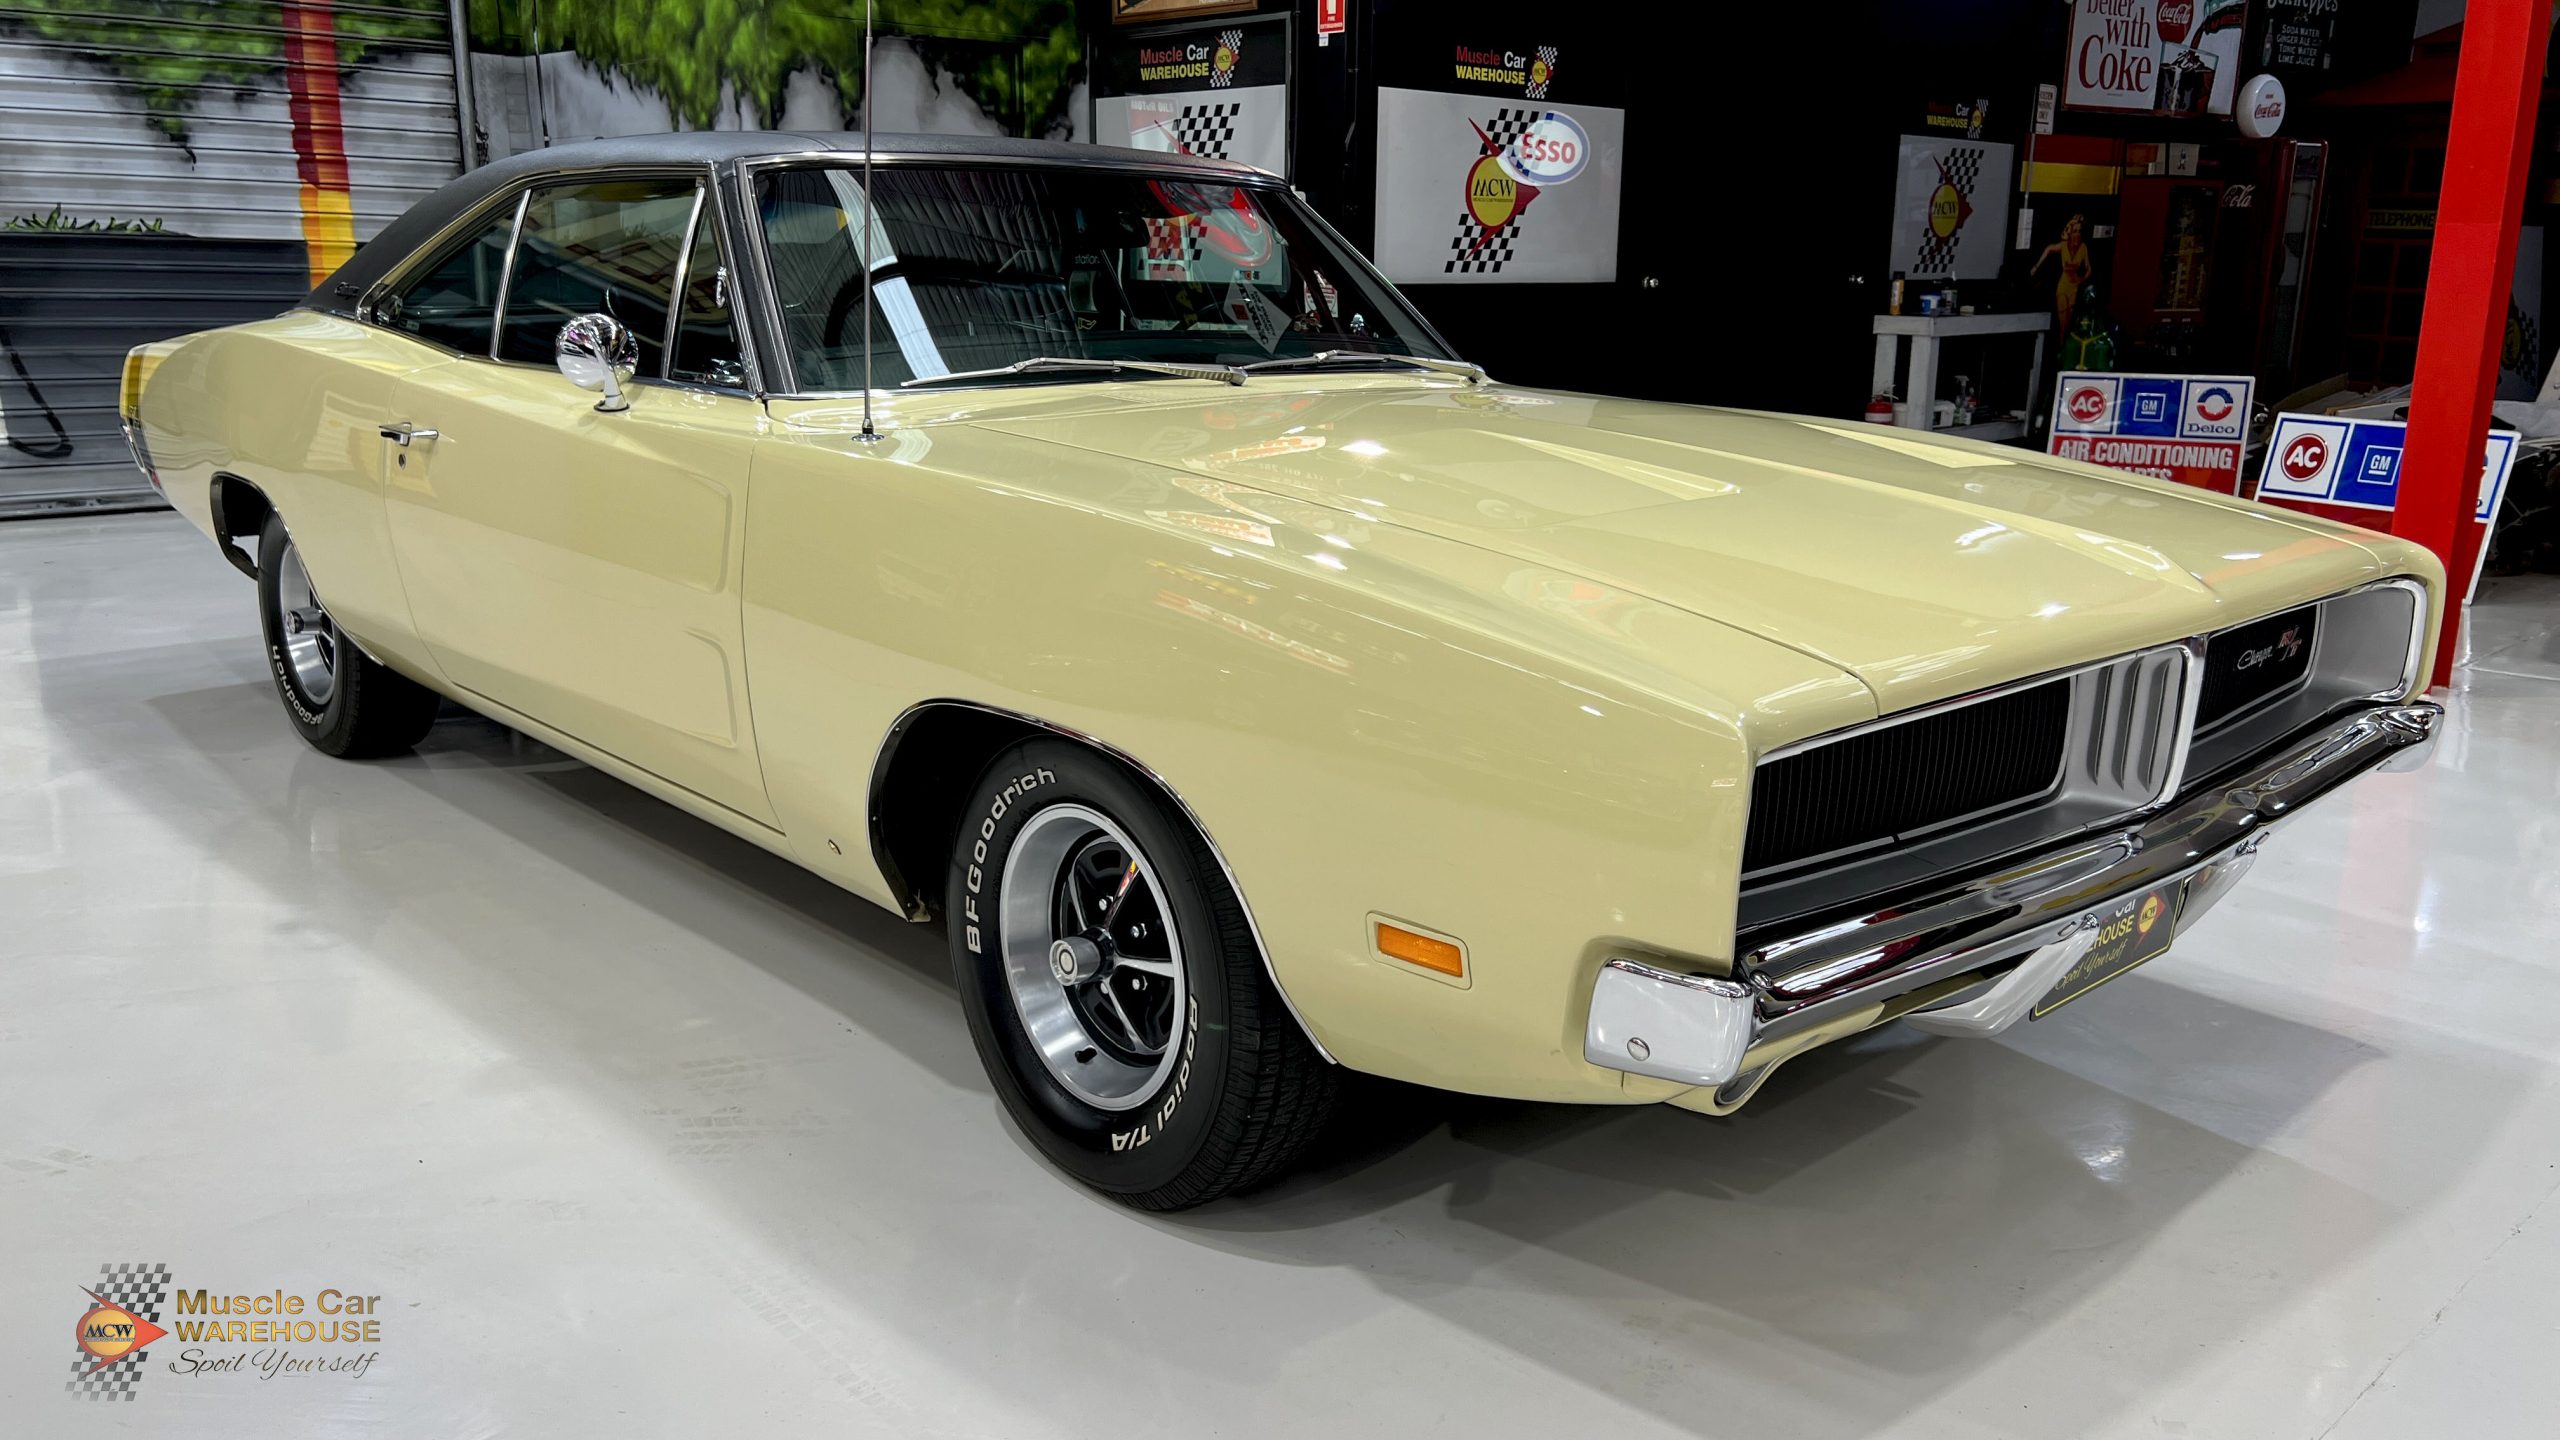 1969 Dodge Charger R/T - Muscle Car Warehouse